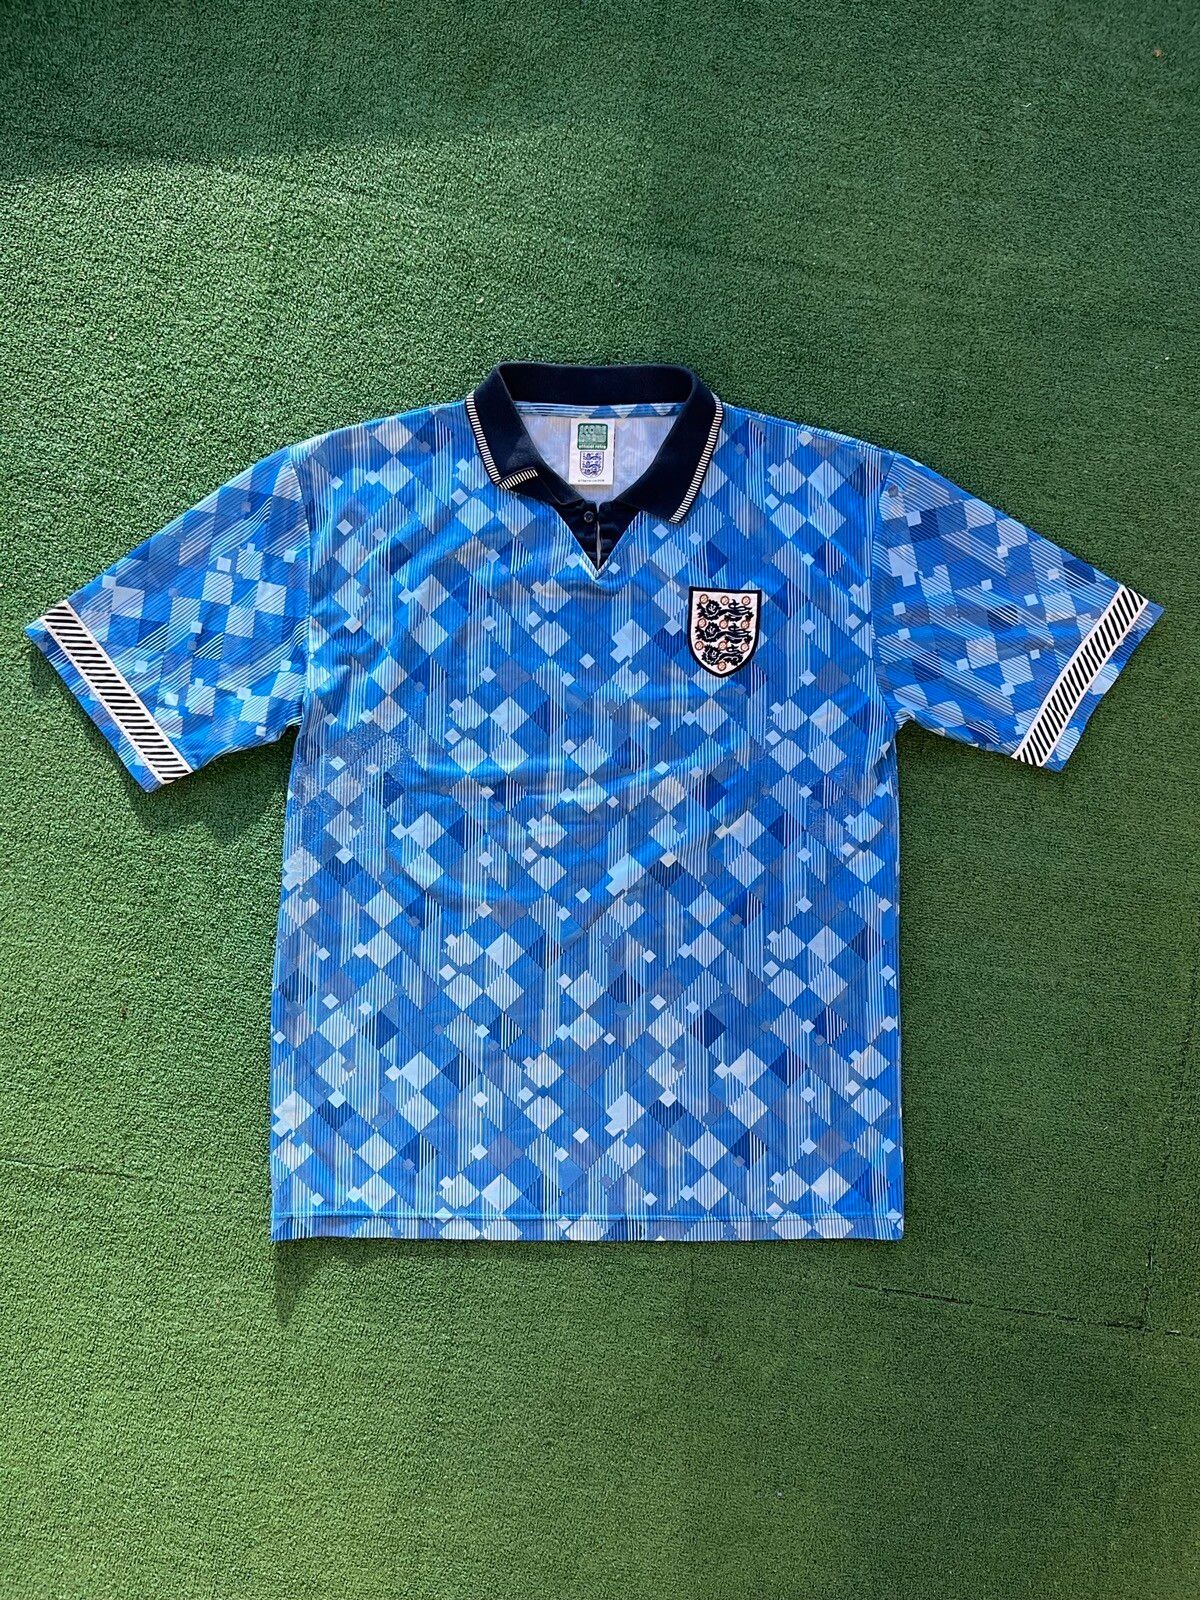 Pre-owned Jersey X Soccer Jersey Blokecore Vintage Score Draw England Team Drill Jersey In Blue